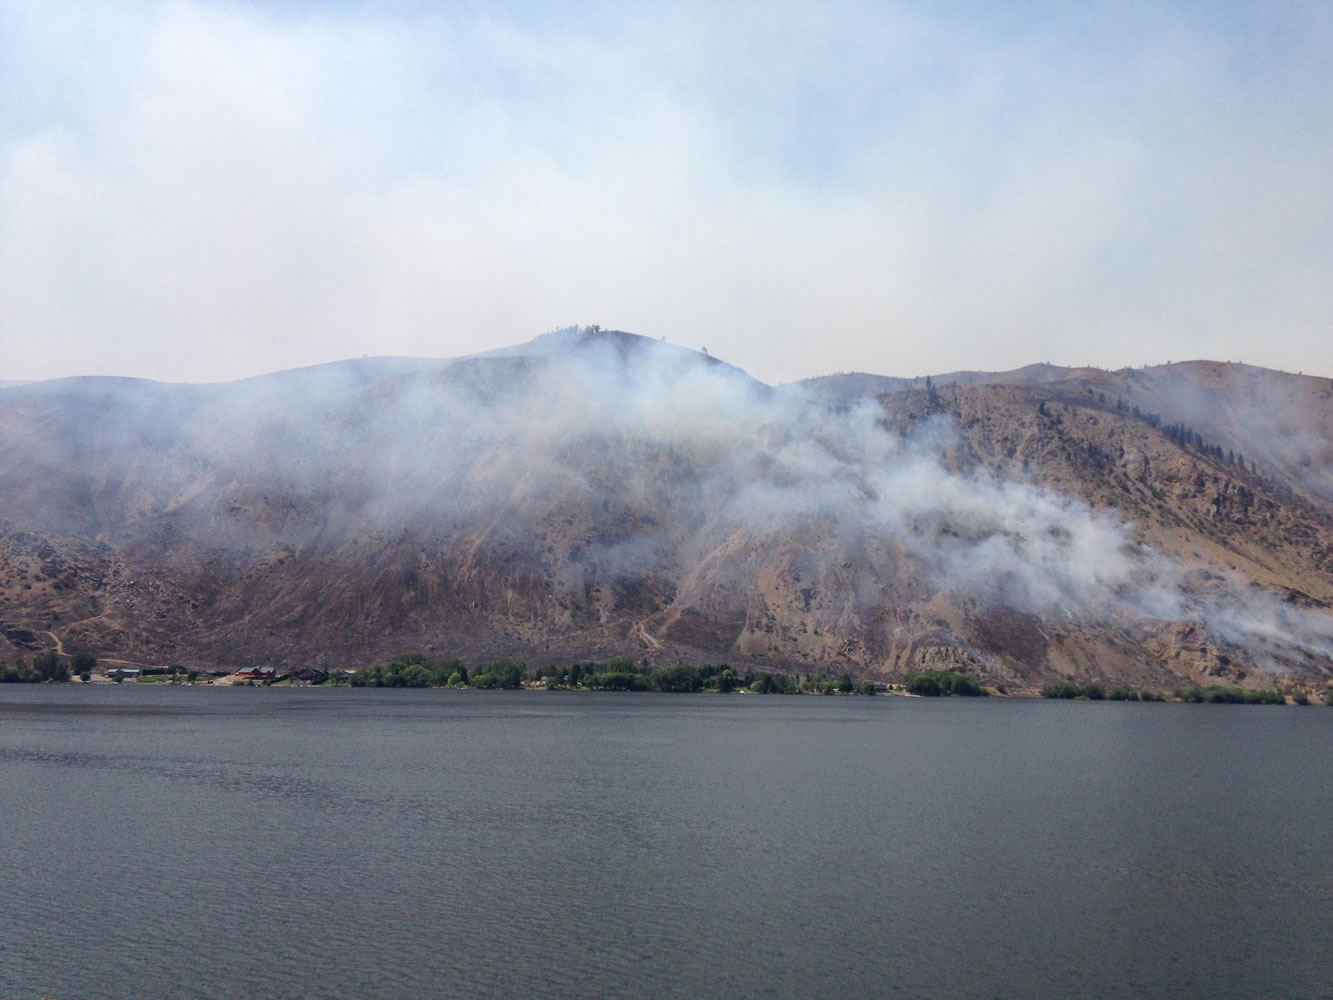 Smoke rises from the area of a wildfire near Entiat, Wash., Friday, July 11, 2014. Several hundred firefighters worked Friday to contain the fire that has burned grass and brush across nearly 30 square miles in central Washington.